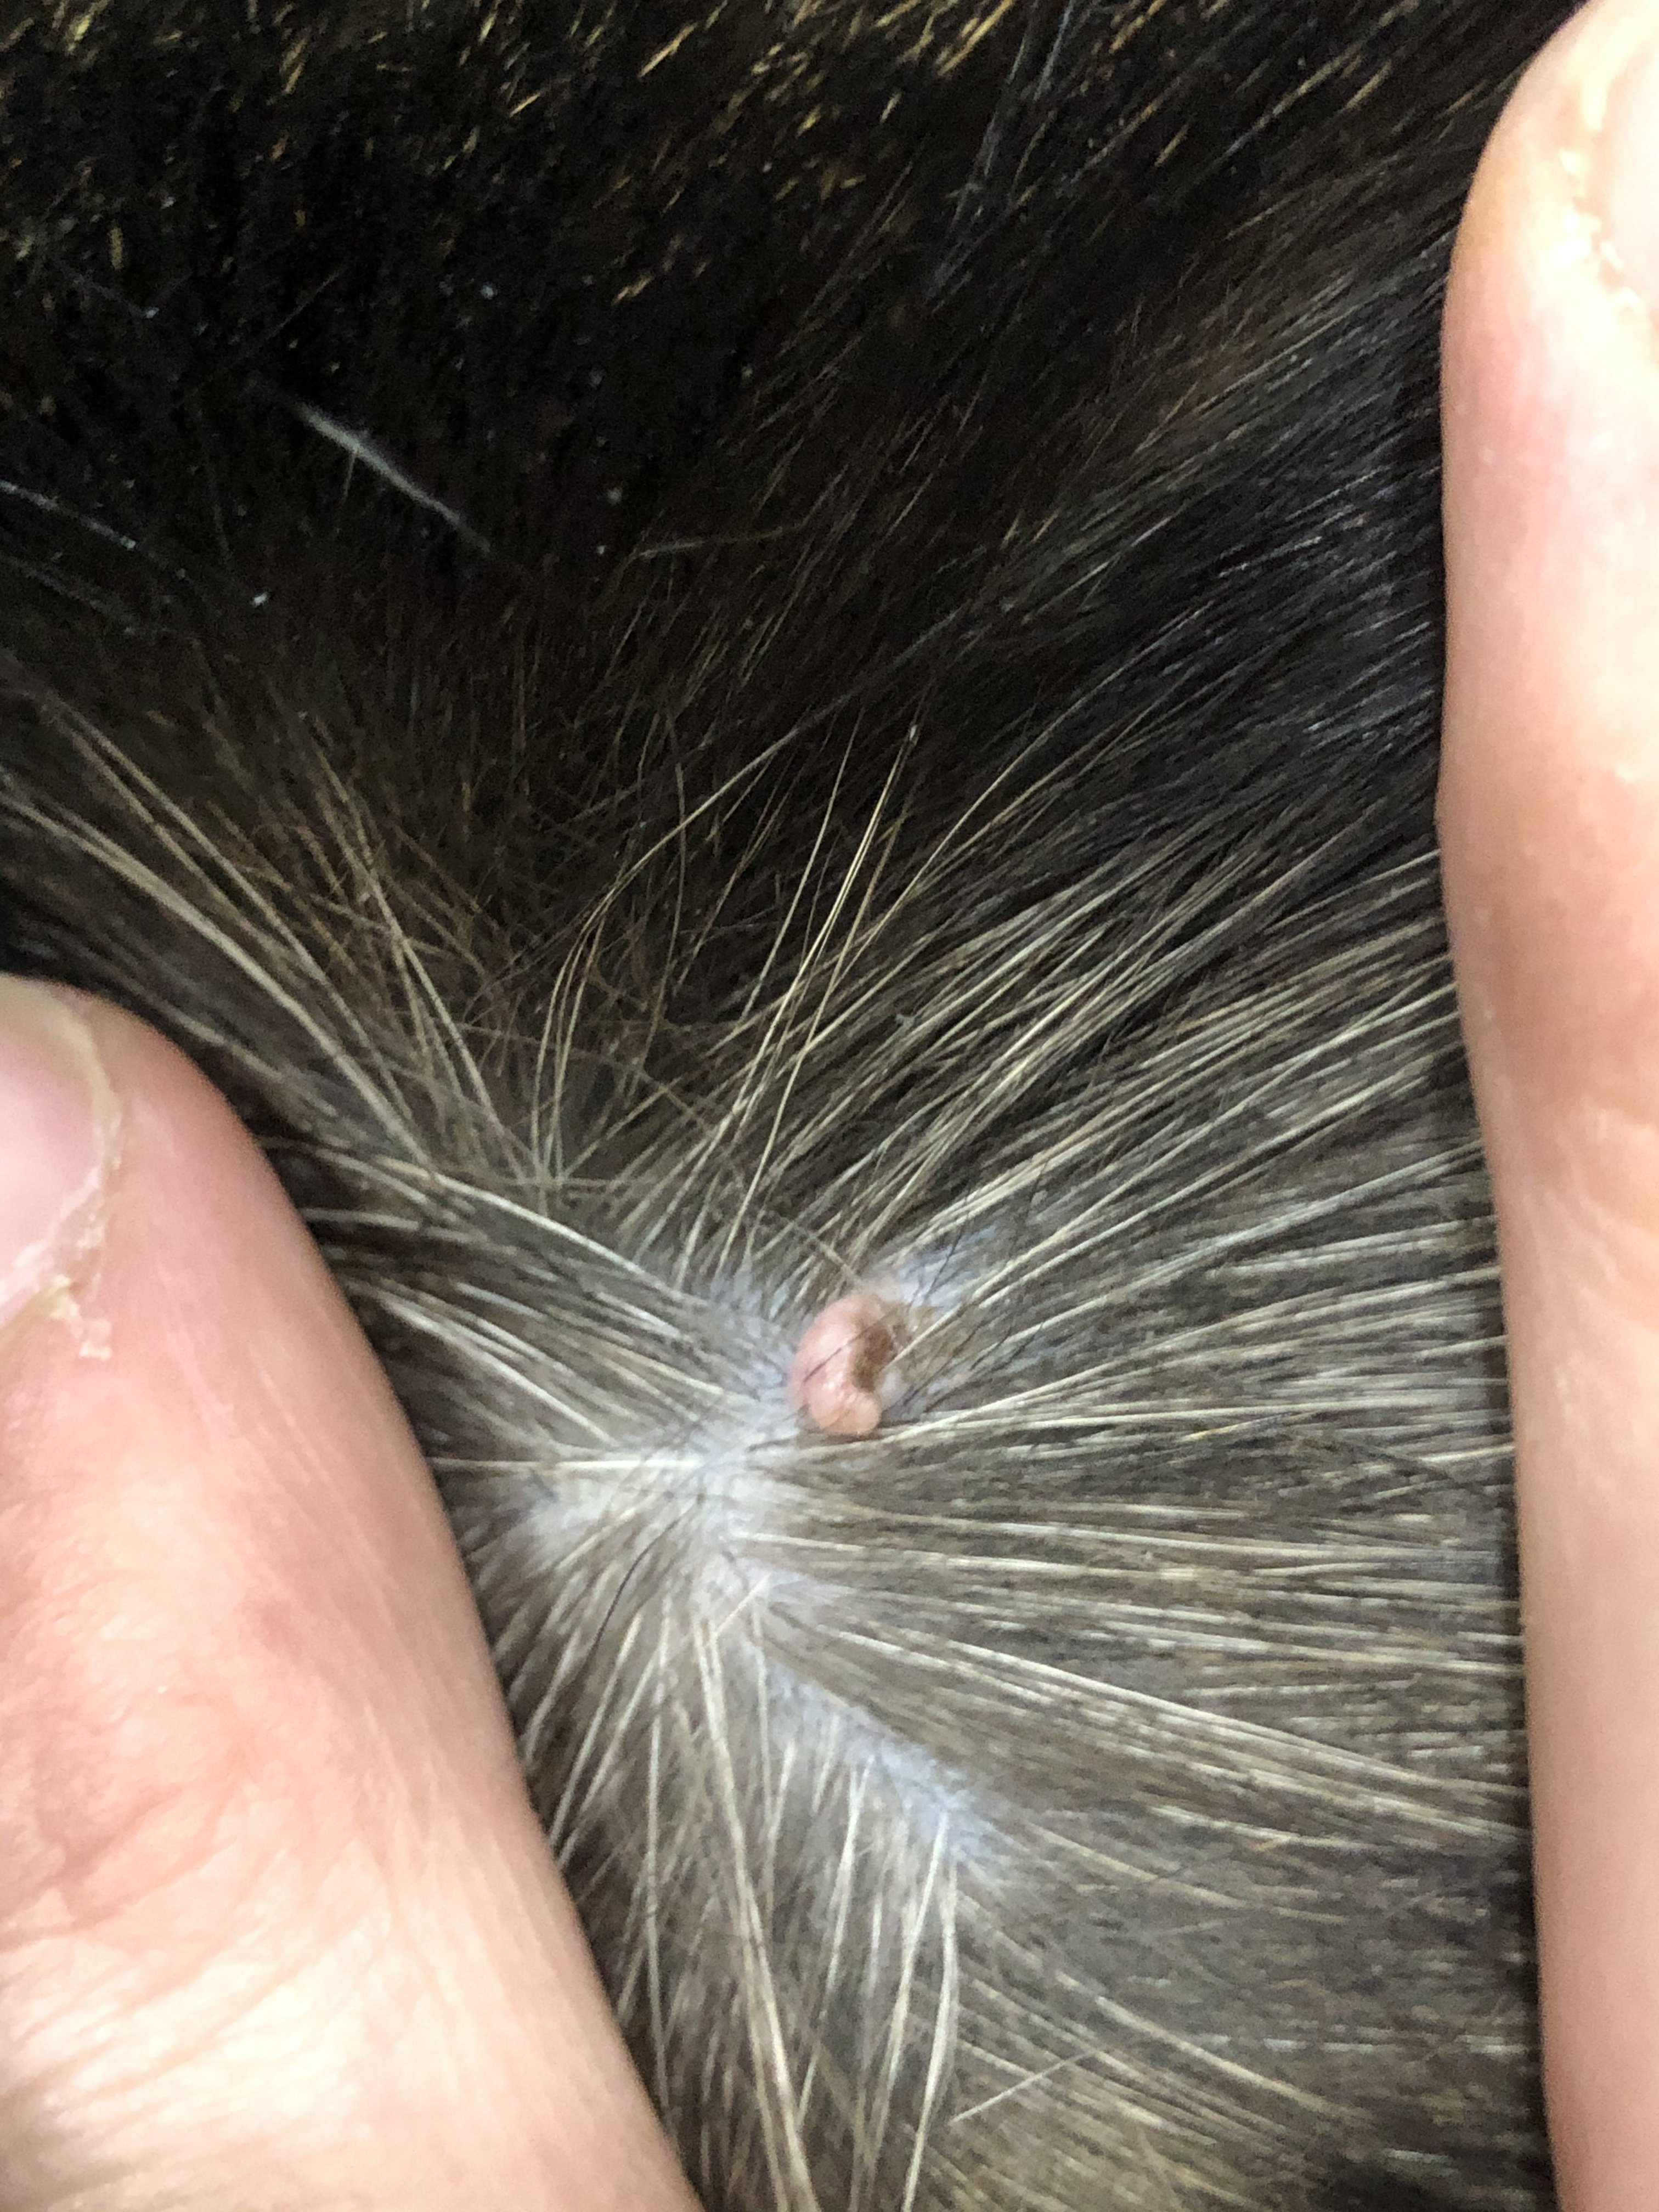 Skin tag/mole on my cat’s back?? TheCatSite